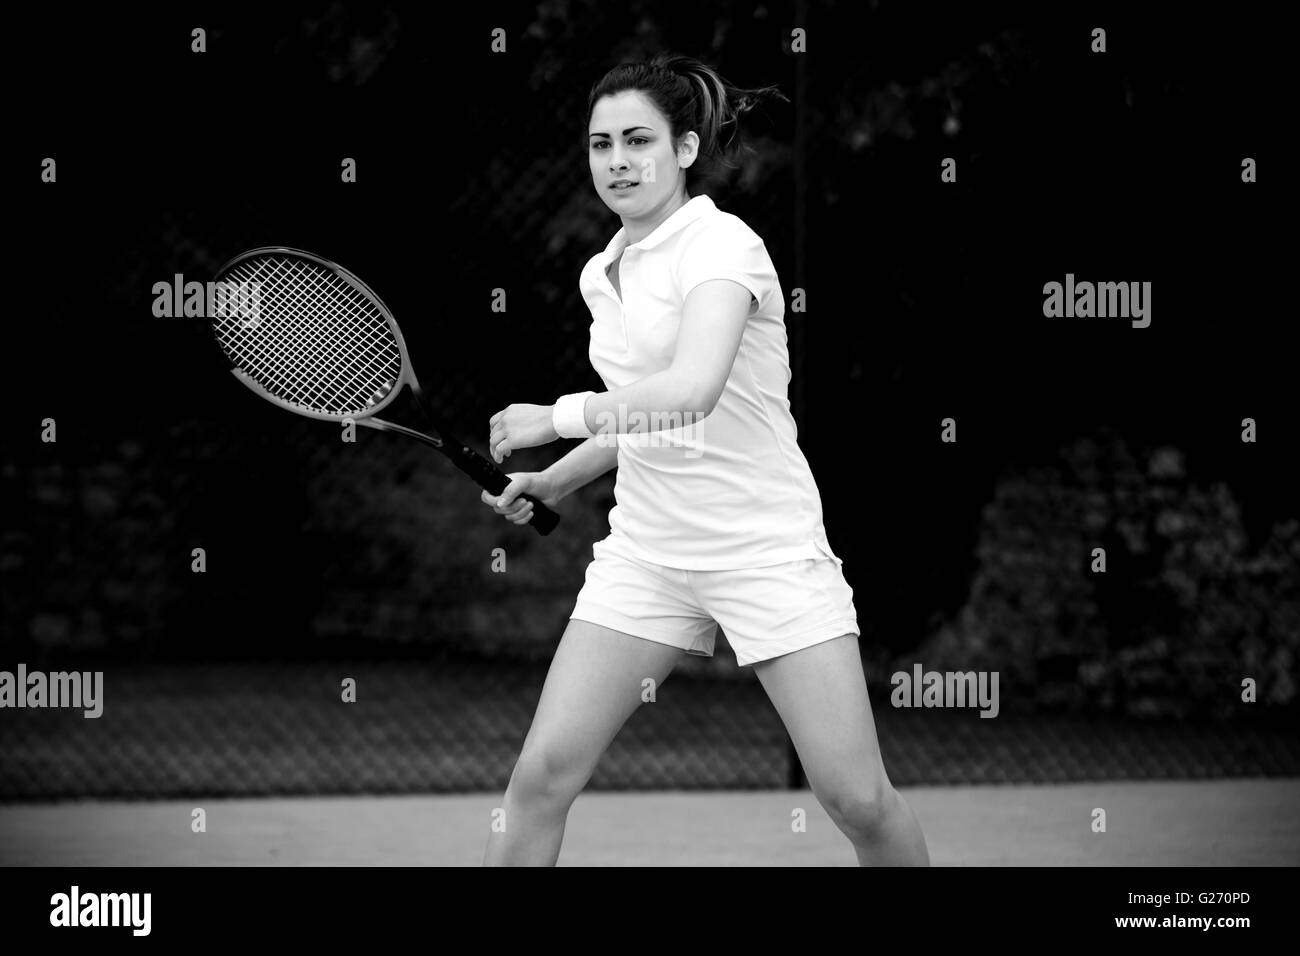 Pretty tennis player playing on court Stock Photo